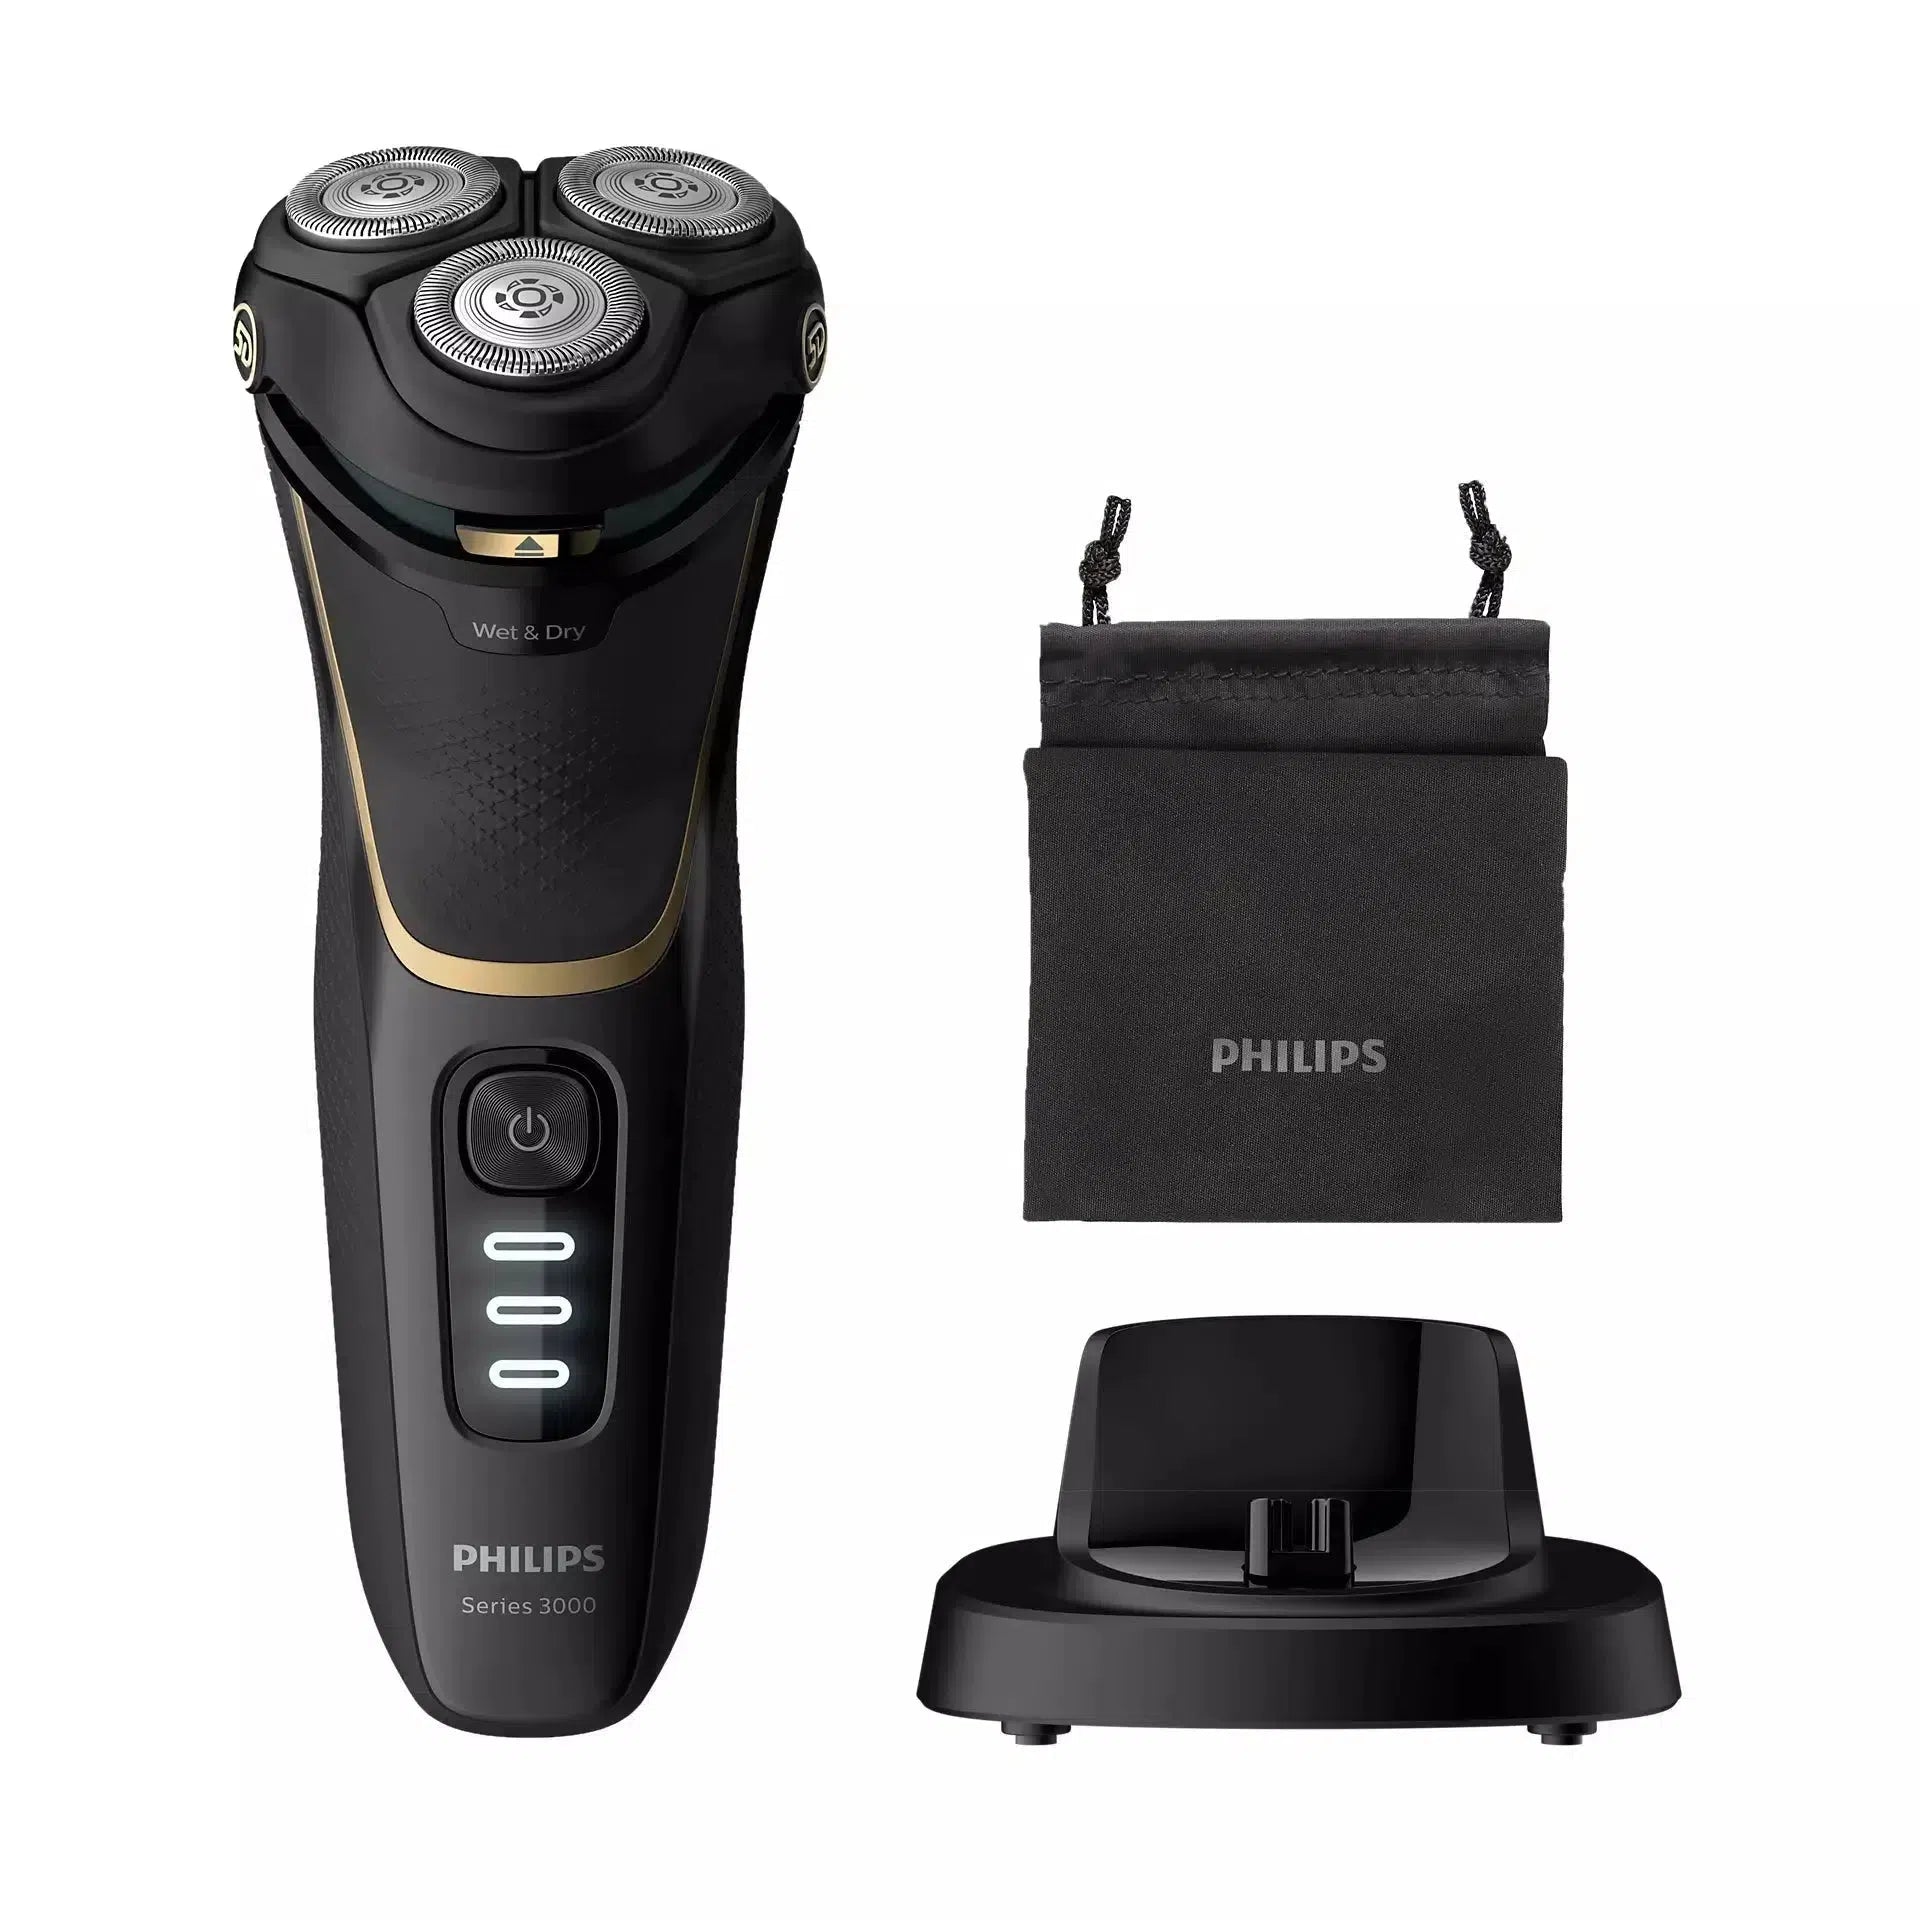 Philips S3333/54 Series 3000 Wet/Dry Electric Shaver - PowerCut Blades, 5D Heads - Healthxpress.ie